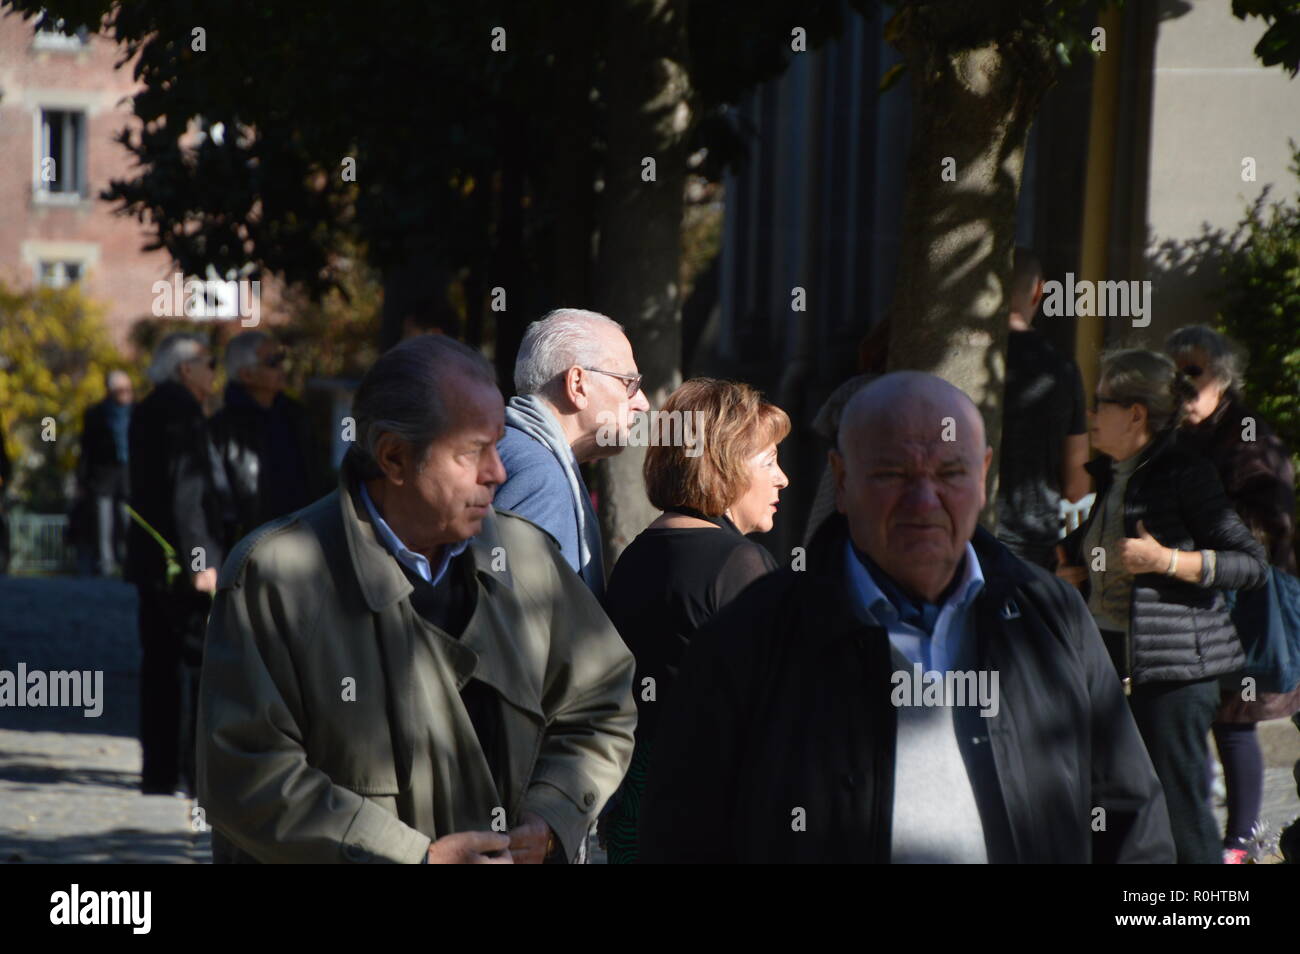 Paris, France. 5th Nov 2018. French celebrities attend the ceremony for the death of Philippe GILDAS, french TV animator. Crematorium of the Cemetery of the Pere Lachaise, Paris, France. 5 november 2018. 13h30.  ALPHACIT NEWIM / Alamy Live News Credit: Alphacit NEWIM/Alamy Live News Stock Photo